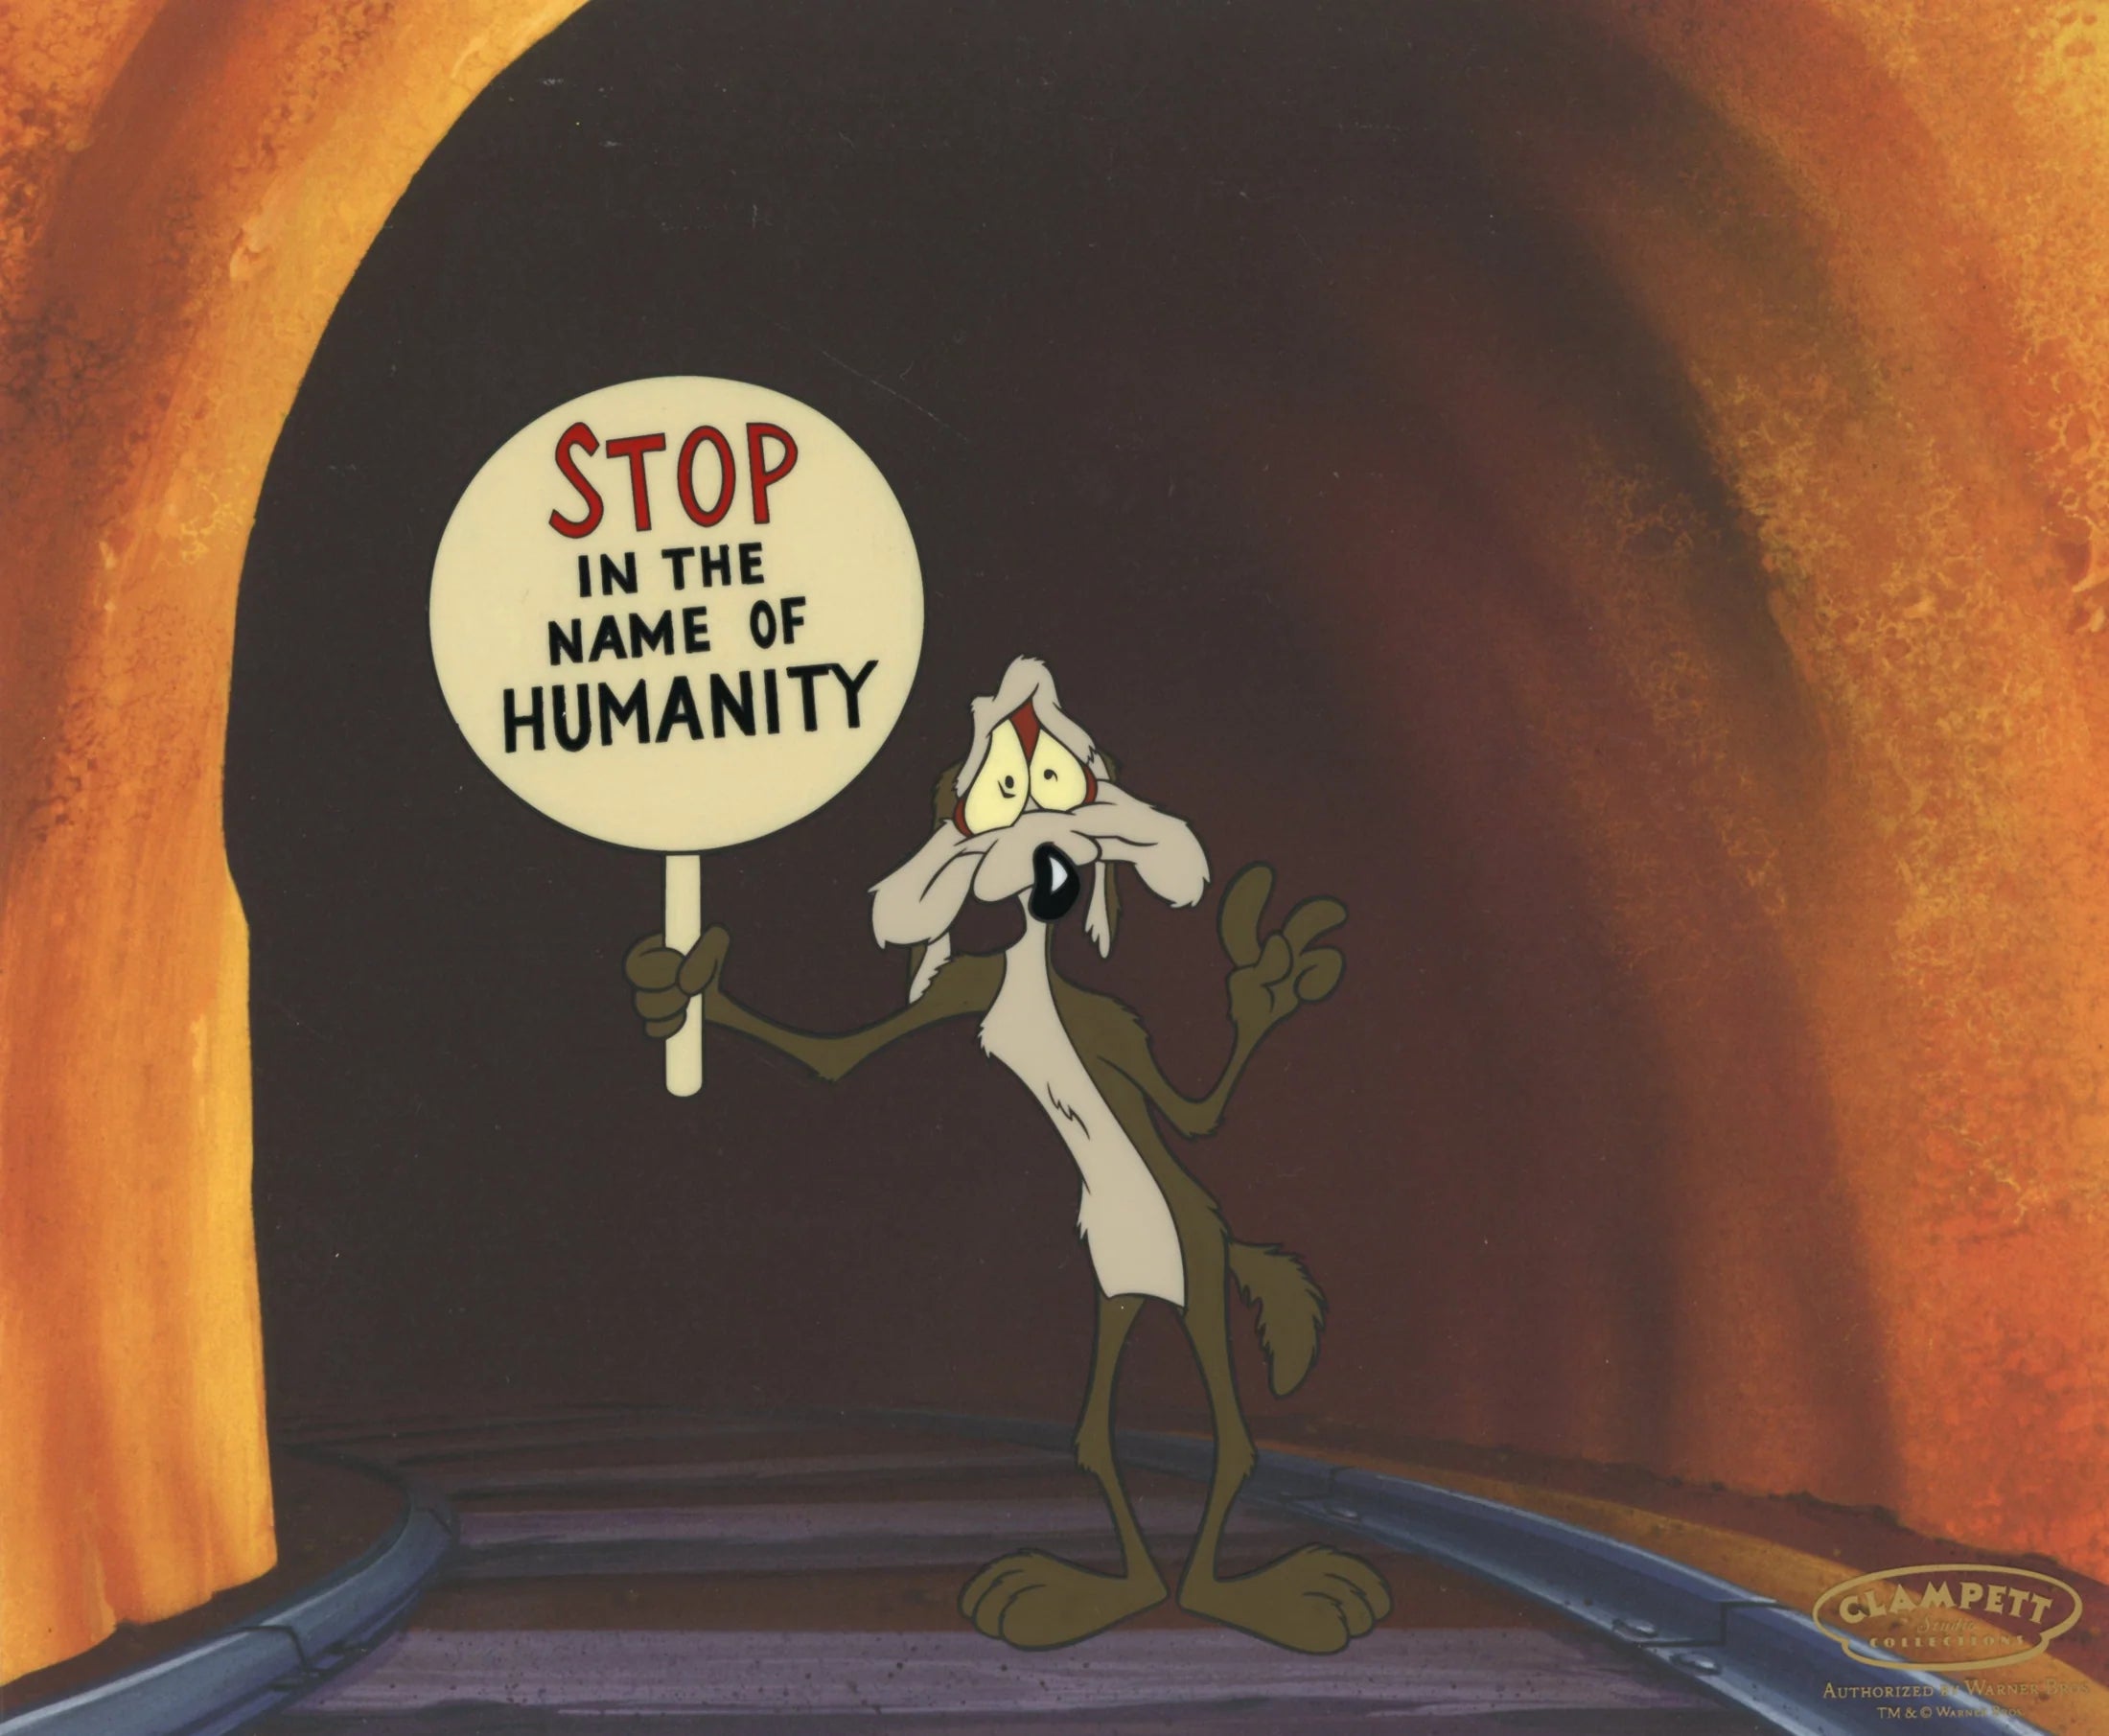 Wile E. Coyote holds up a sign. "IN THE NAME OF HUMANITY"